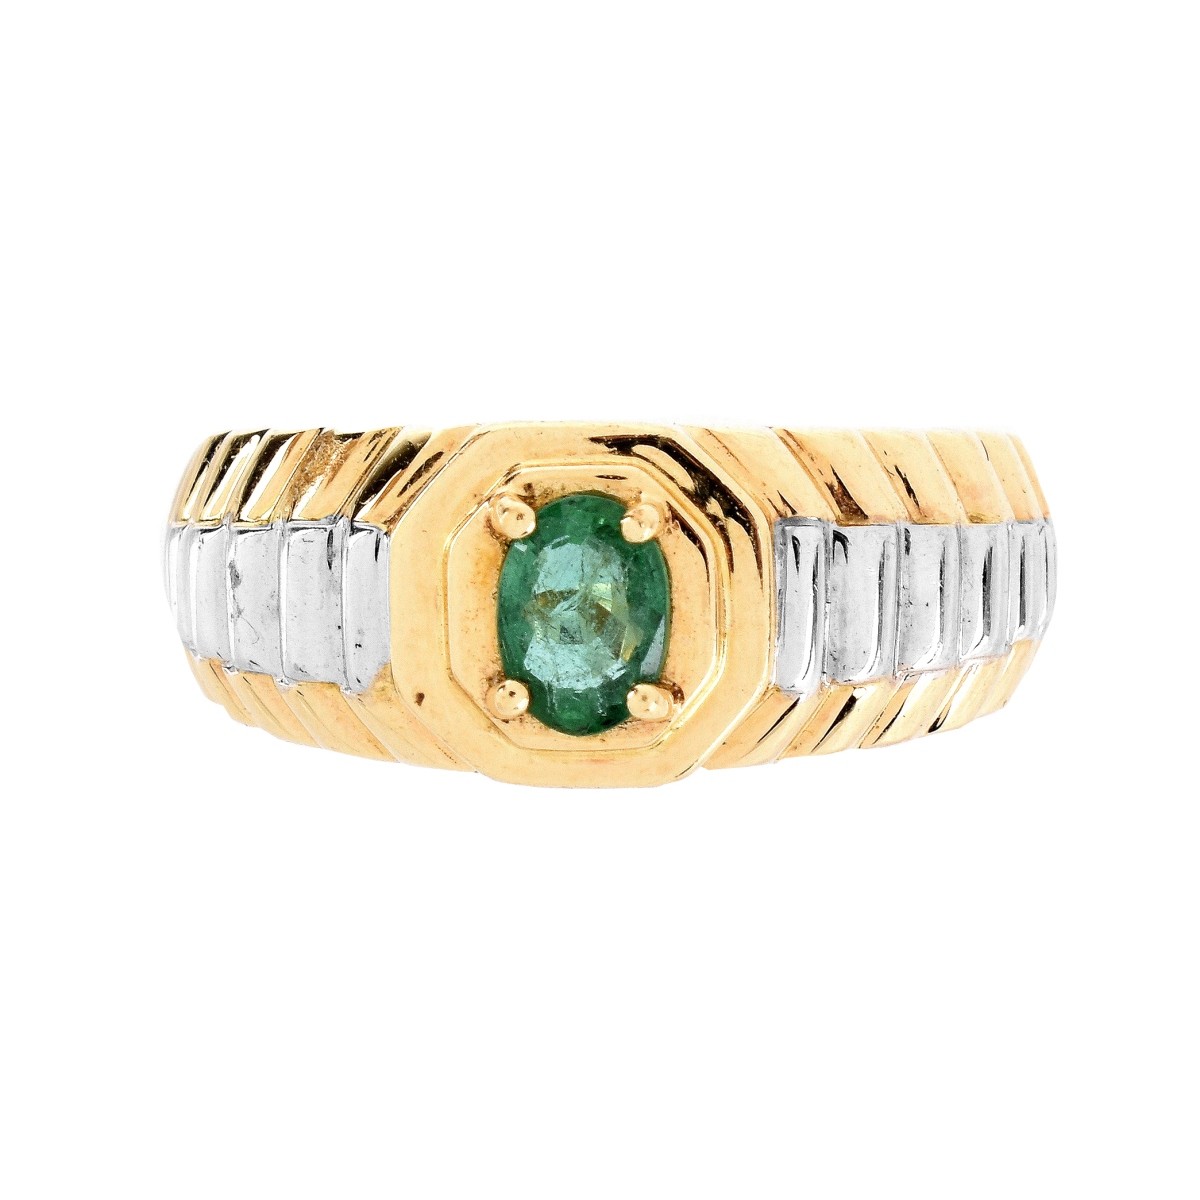 Man's Vintage Emerald and 14K Ring - Image 2 of 7